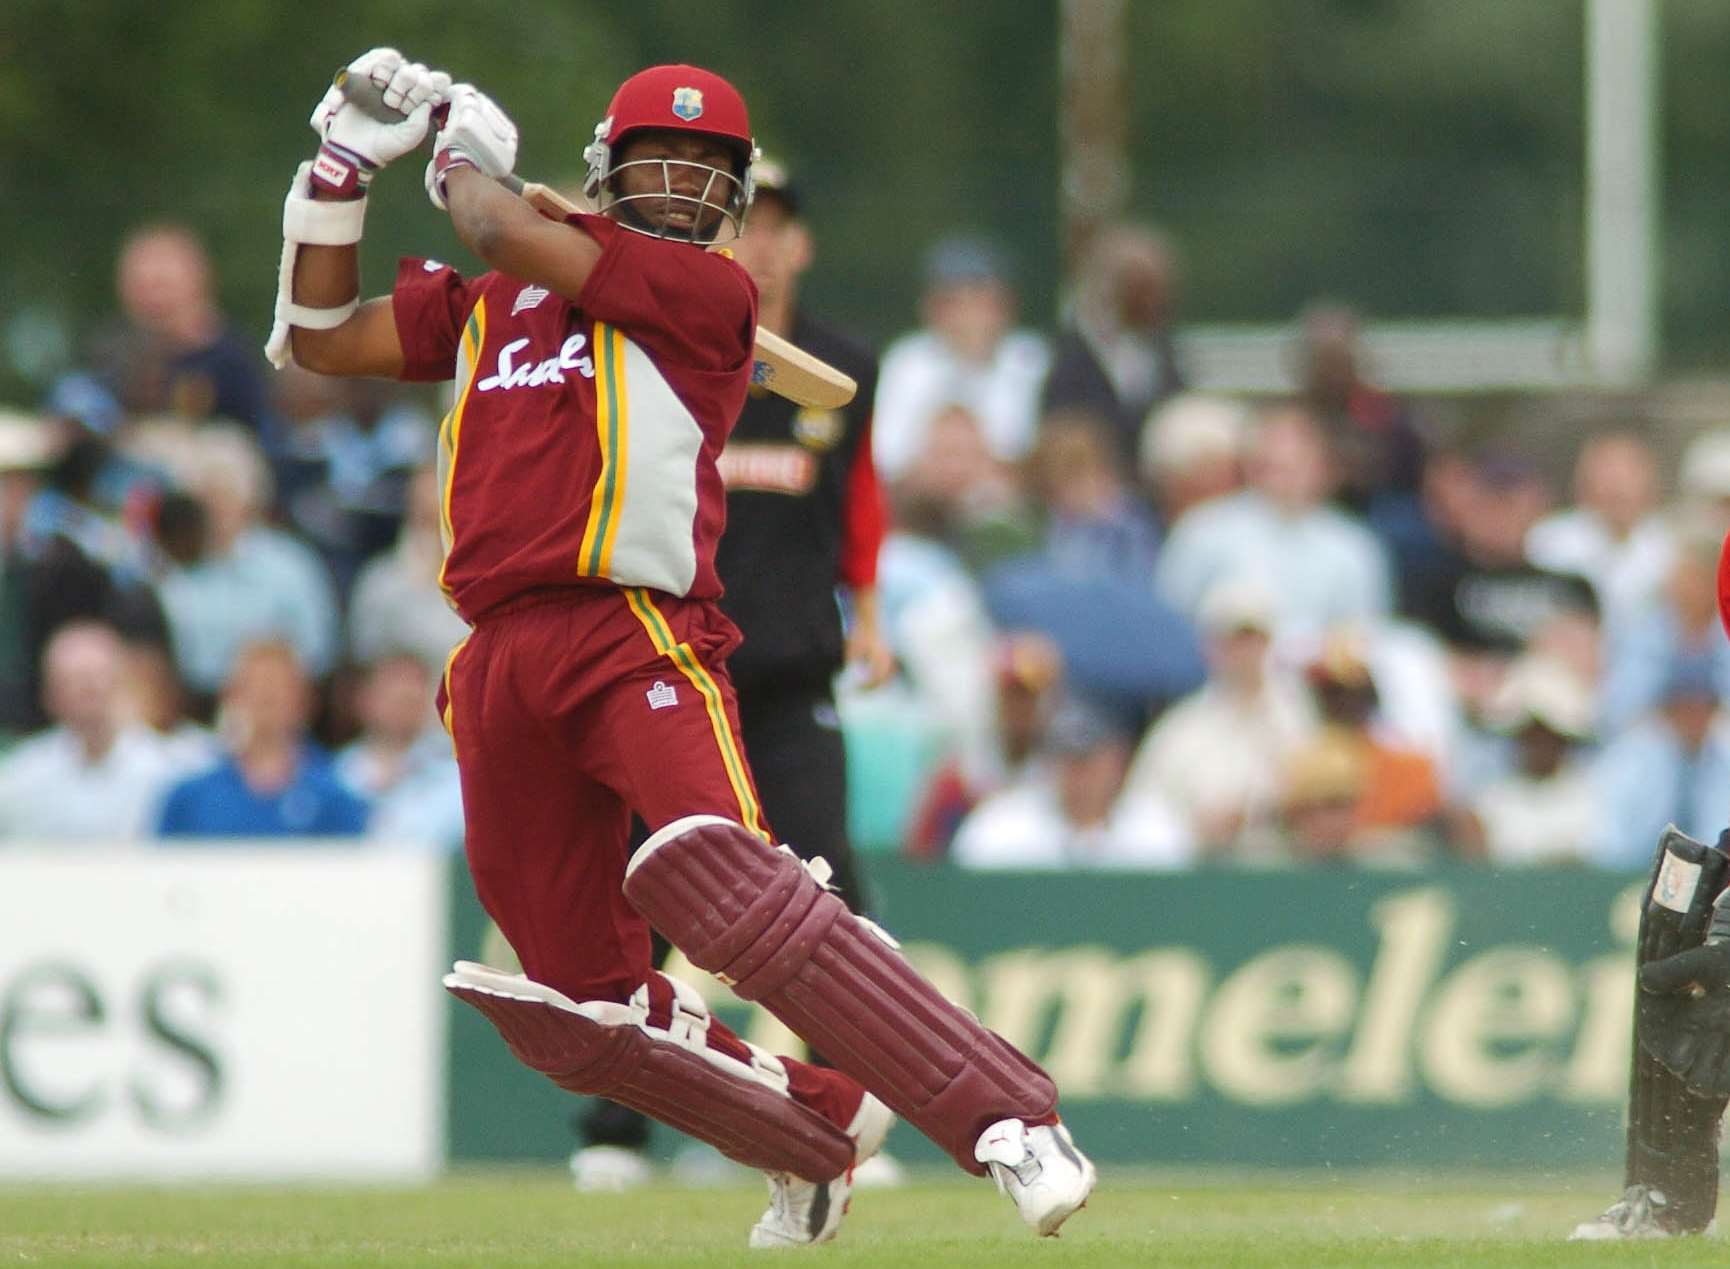 Brian Lara cuts a James Tredwell delivery on the West Indies visit to Beckenham in June 2004. Picture: Ady Kerry.